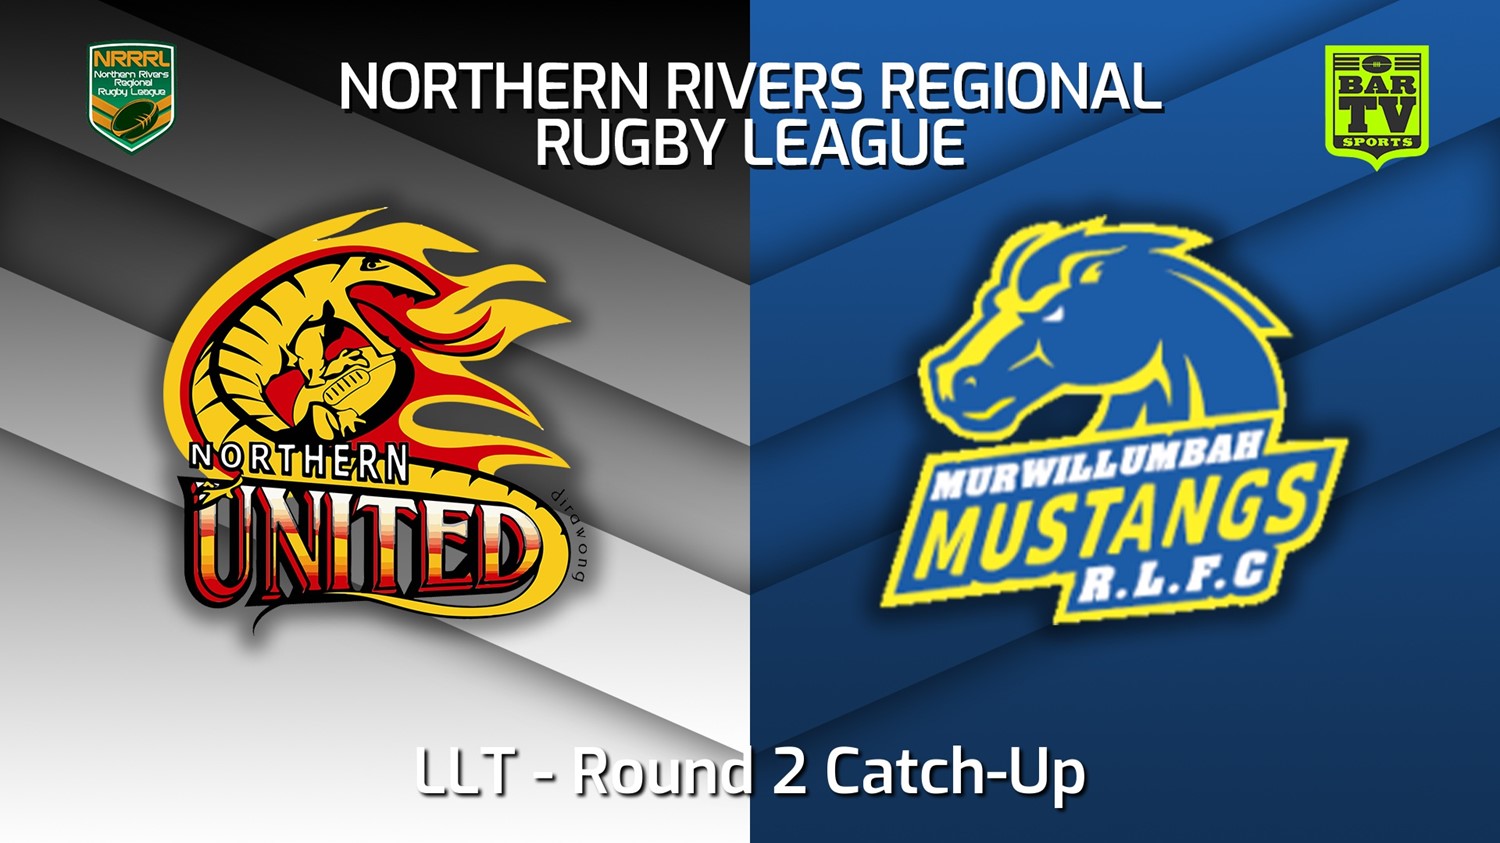 220609-Northern Rivers Round 2 Catch-Up - LLT - Northern United v Murwillumbah Mustangs Slate Image